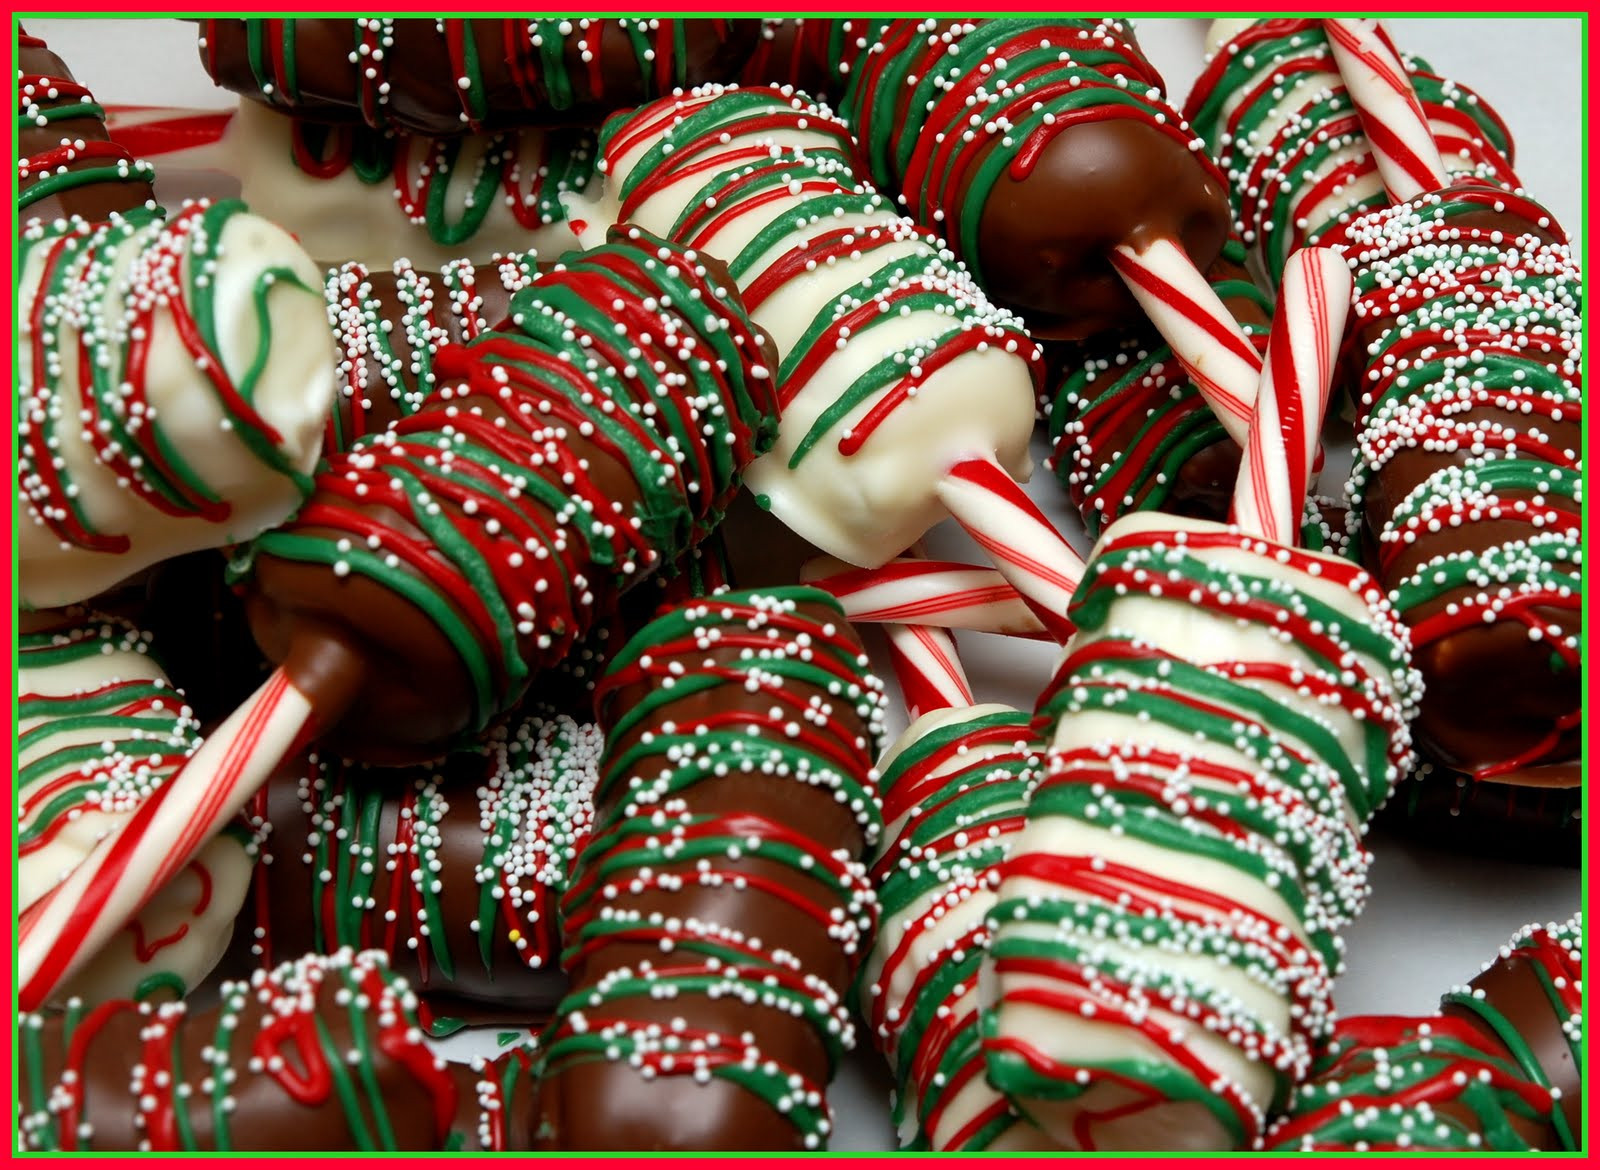 Christmas Chocolate Candy
 CHOCOLATE DIPPED MARSHMALLOWS ON CANDY CANES Hugs and